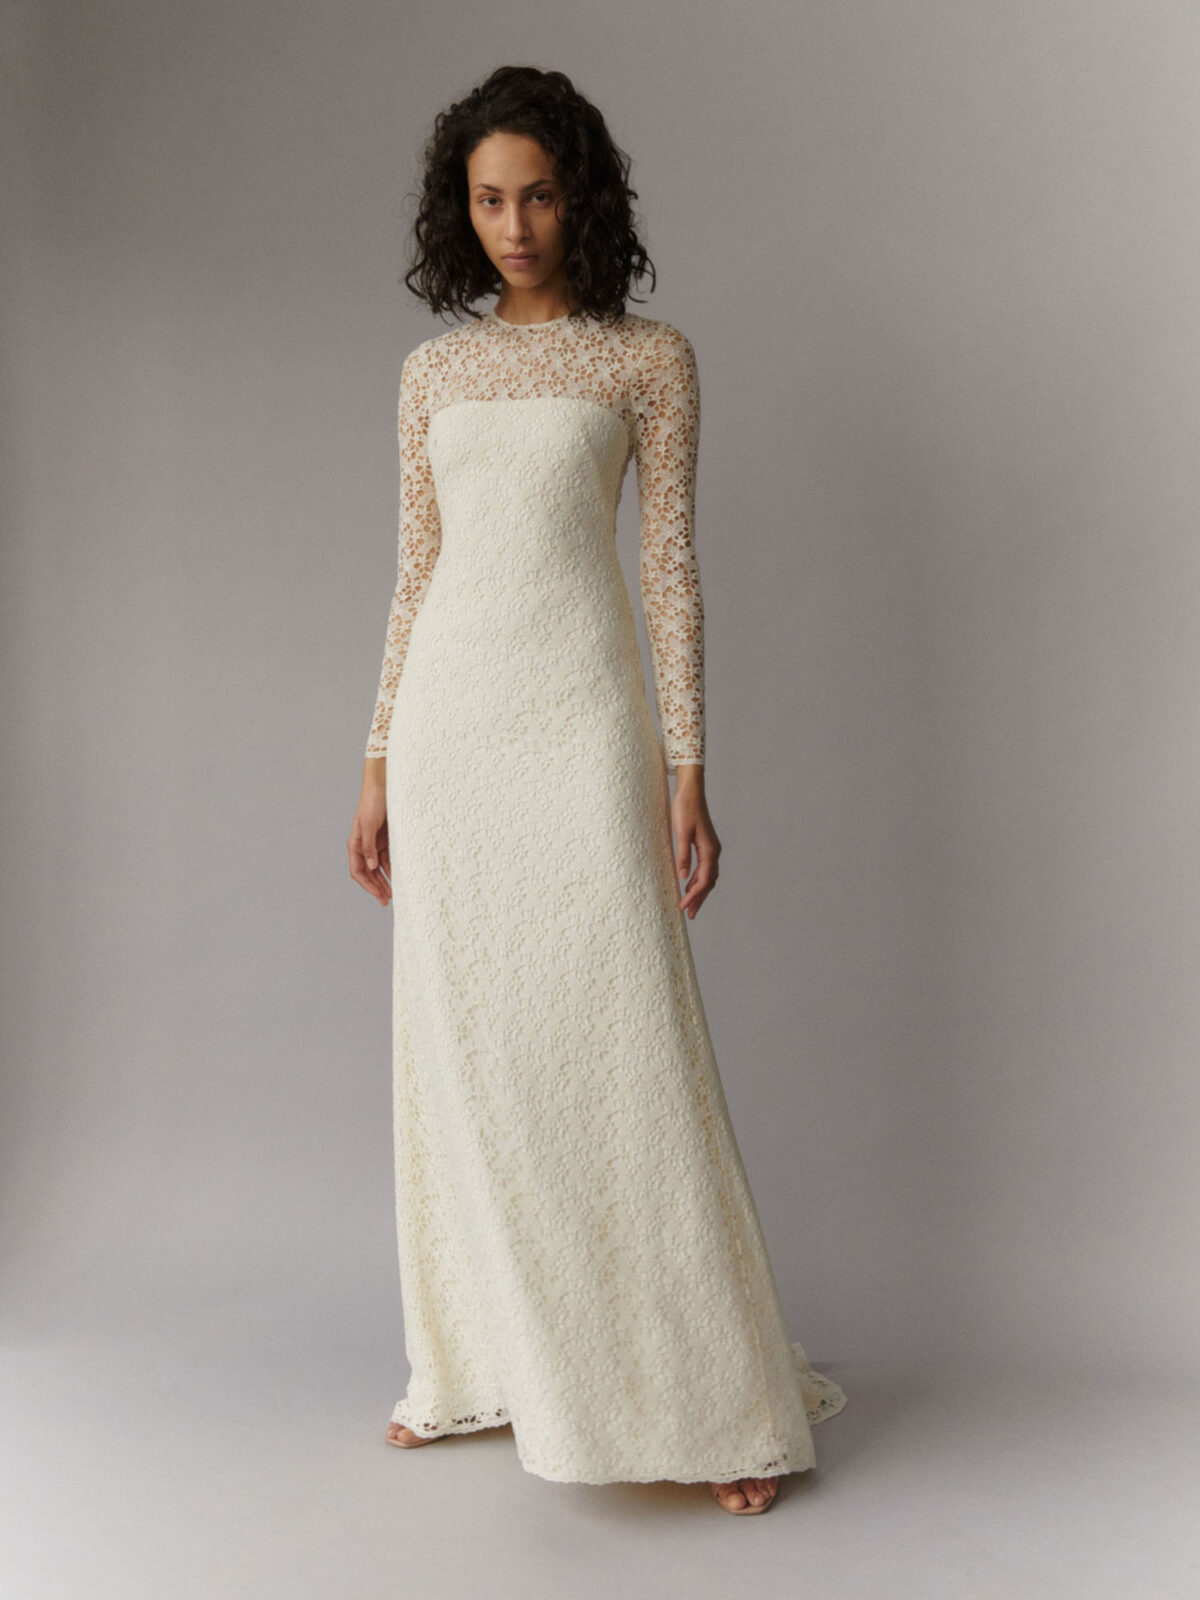 high neck lace wedding dress in silk leavers lace and buttery soft silk crepe